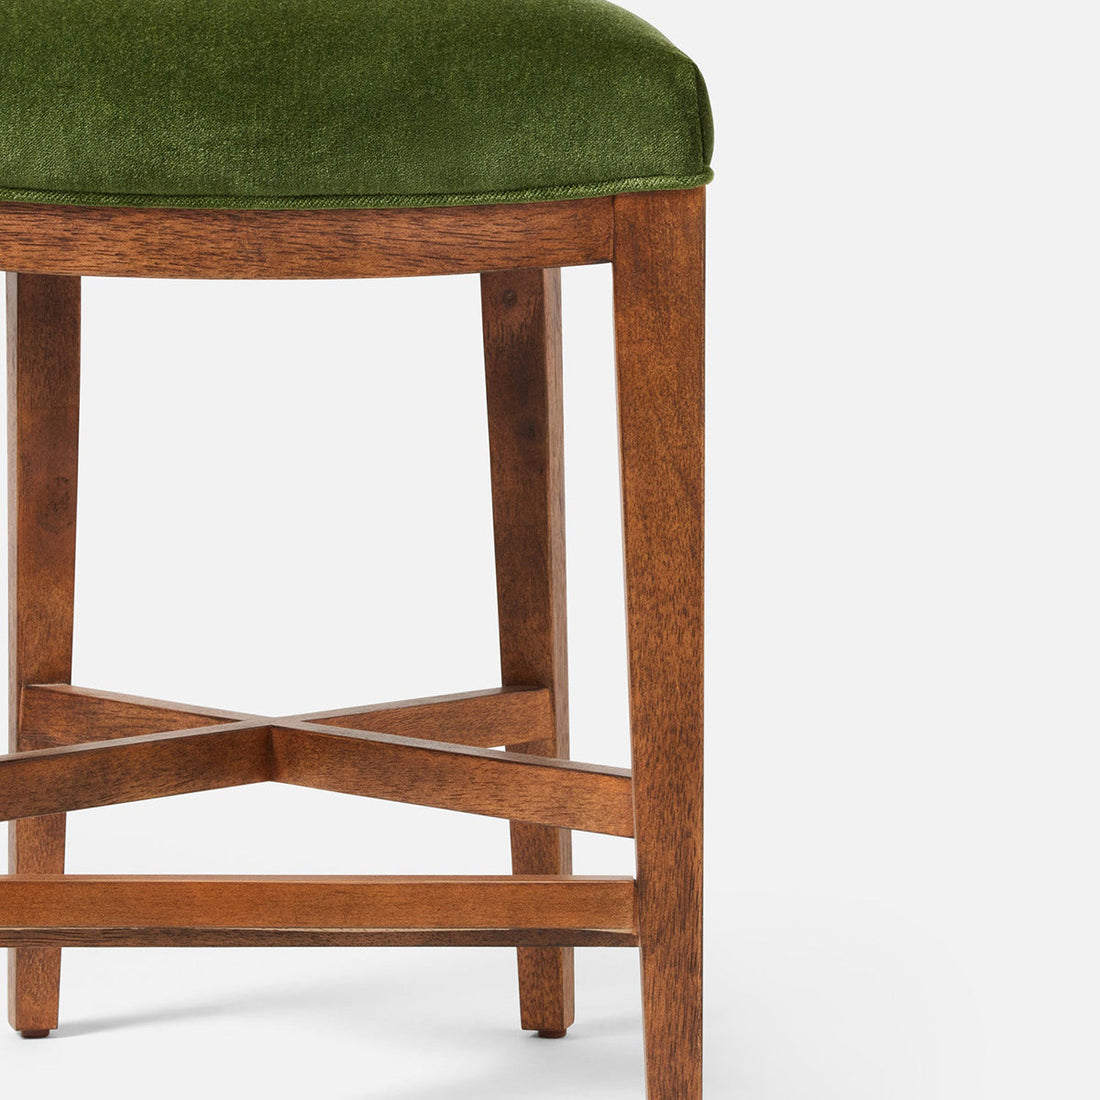 Made Goods Carleen Wingback Counter Stool in Weser Fabric